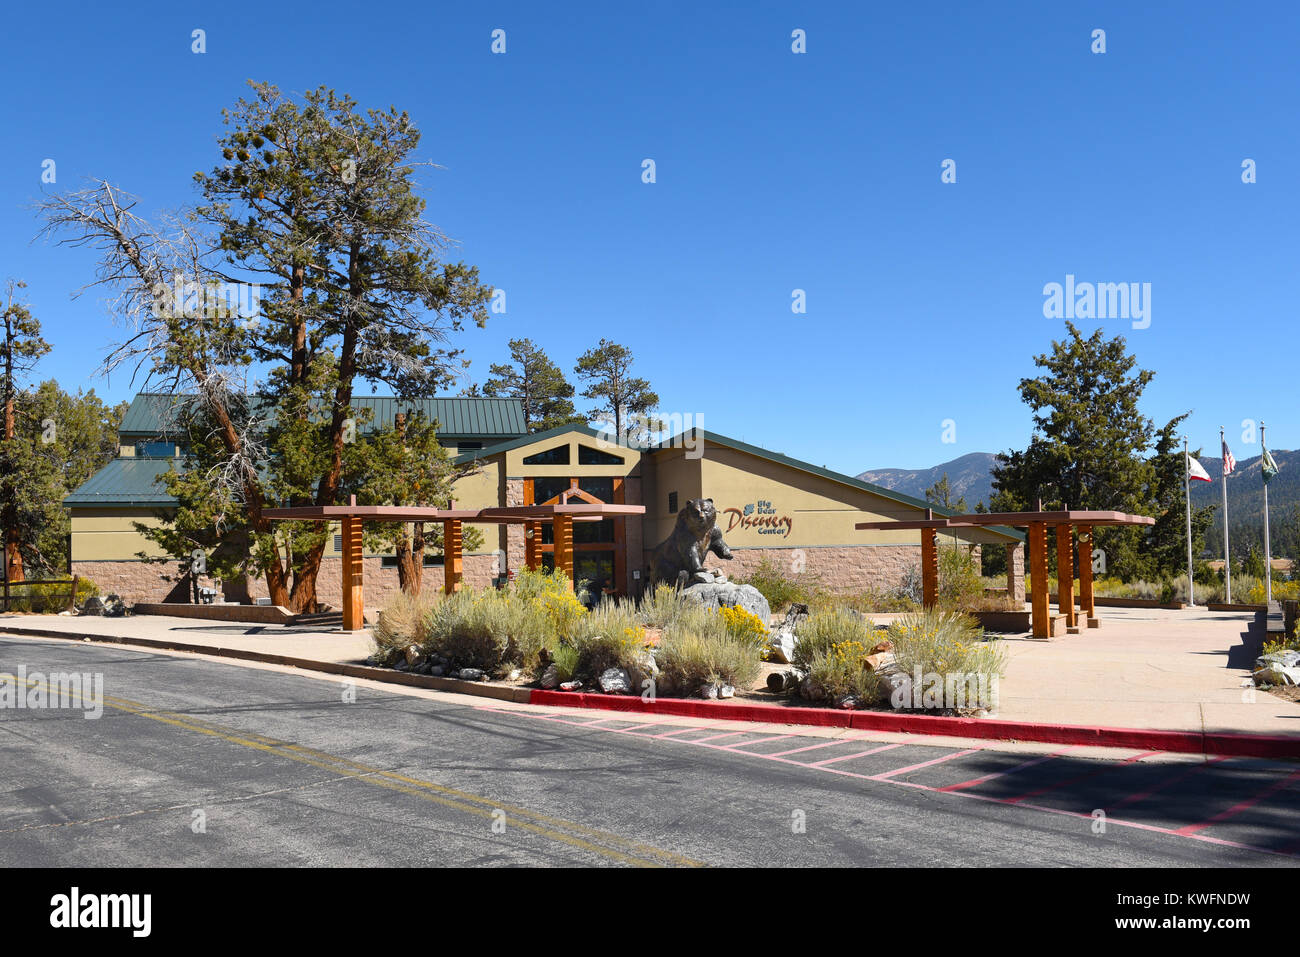 FAWNSKIN, CALIFORNIA - SEPTEMBER 25, 2016: Big Bear Discovery Center. The Discovery Center is an educational center in the San Bernardino National For Stock Photo